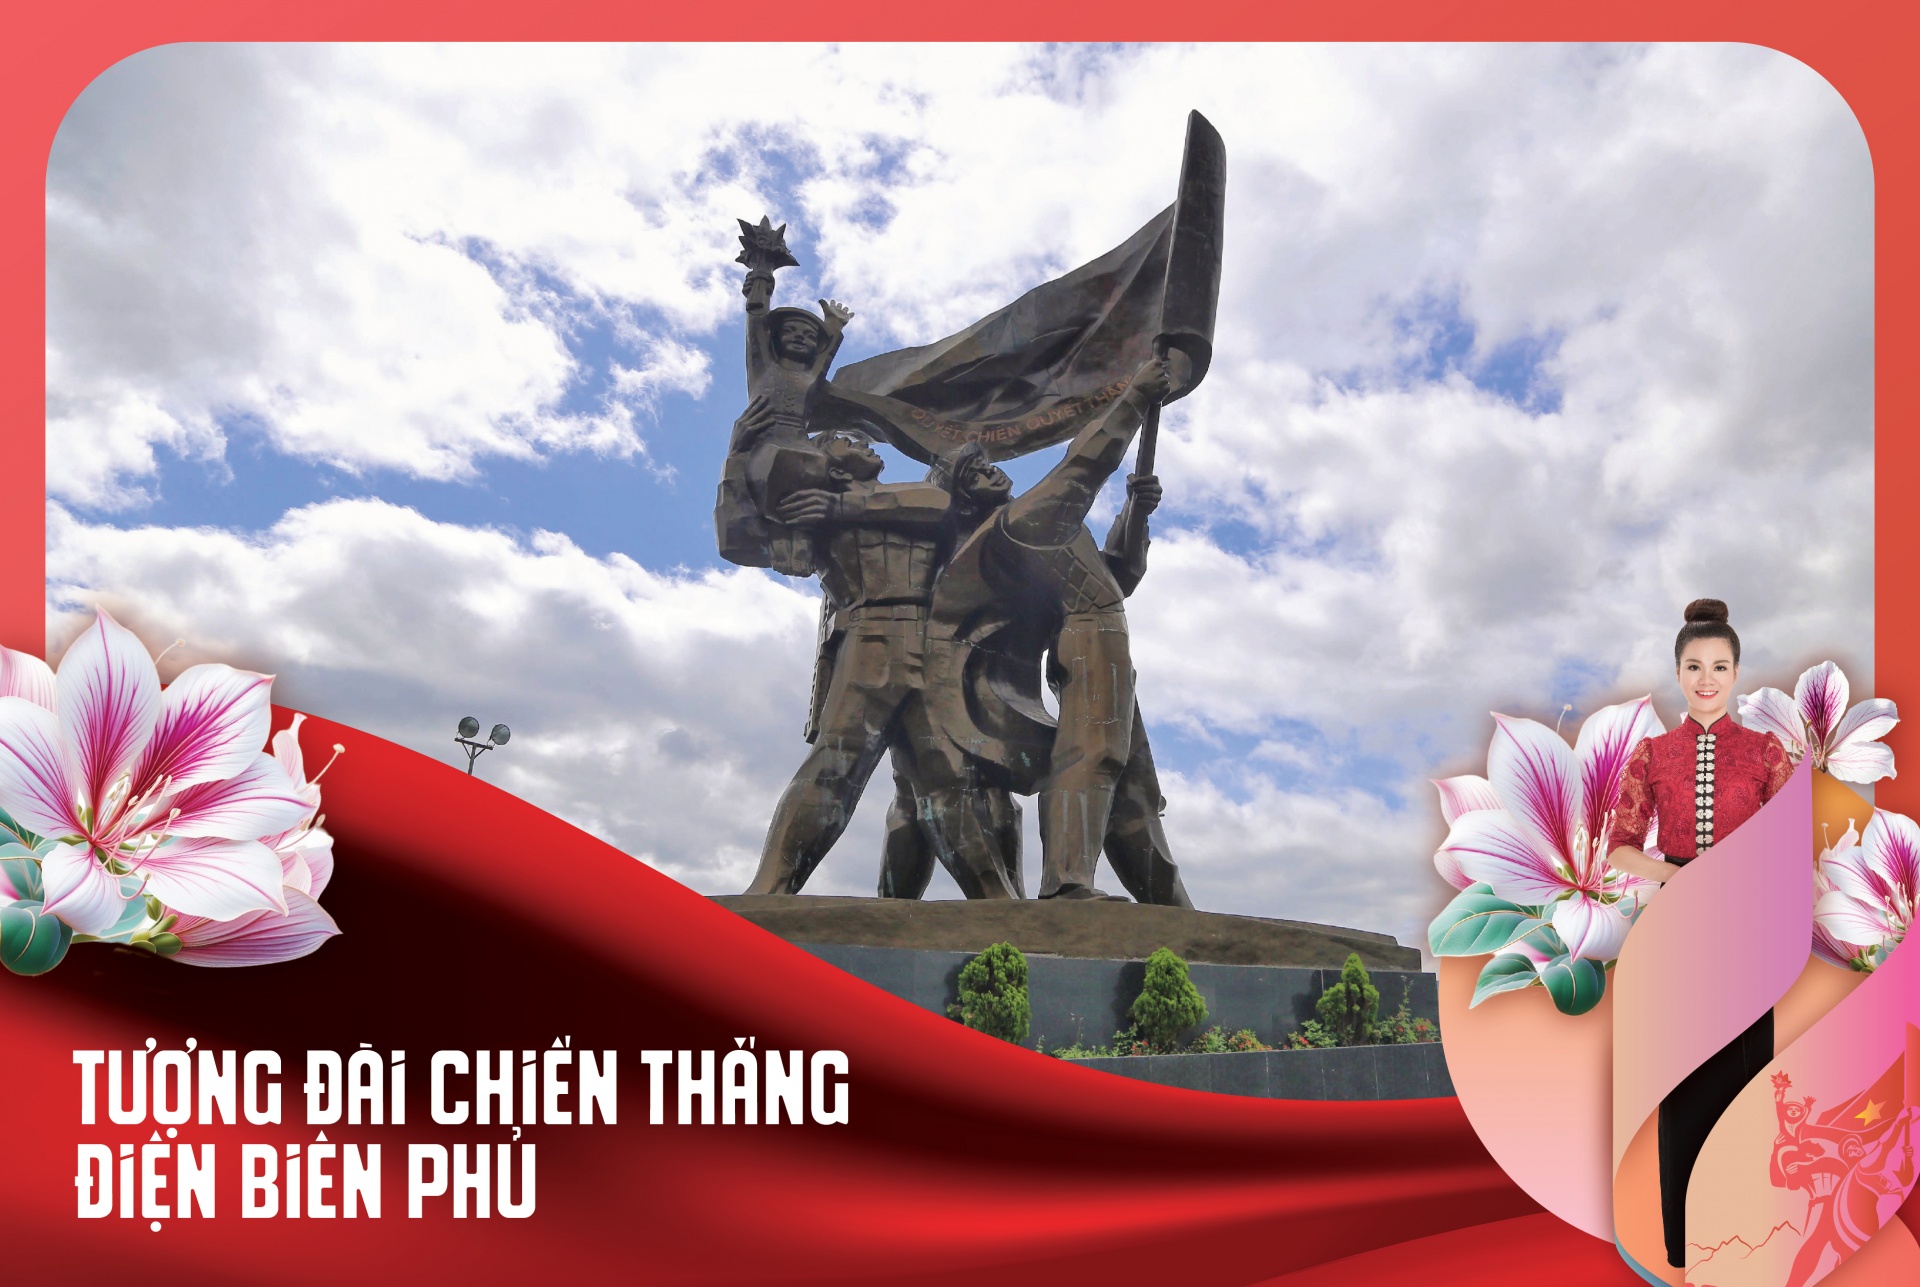 Muong Thanh Group campaign celebrates 70th anniversary of Dien Bien Phu Victory